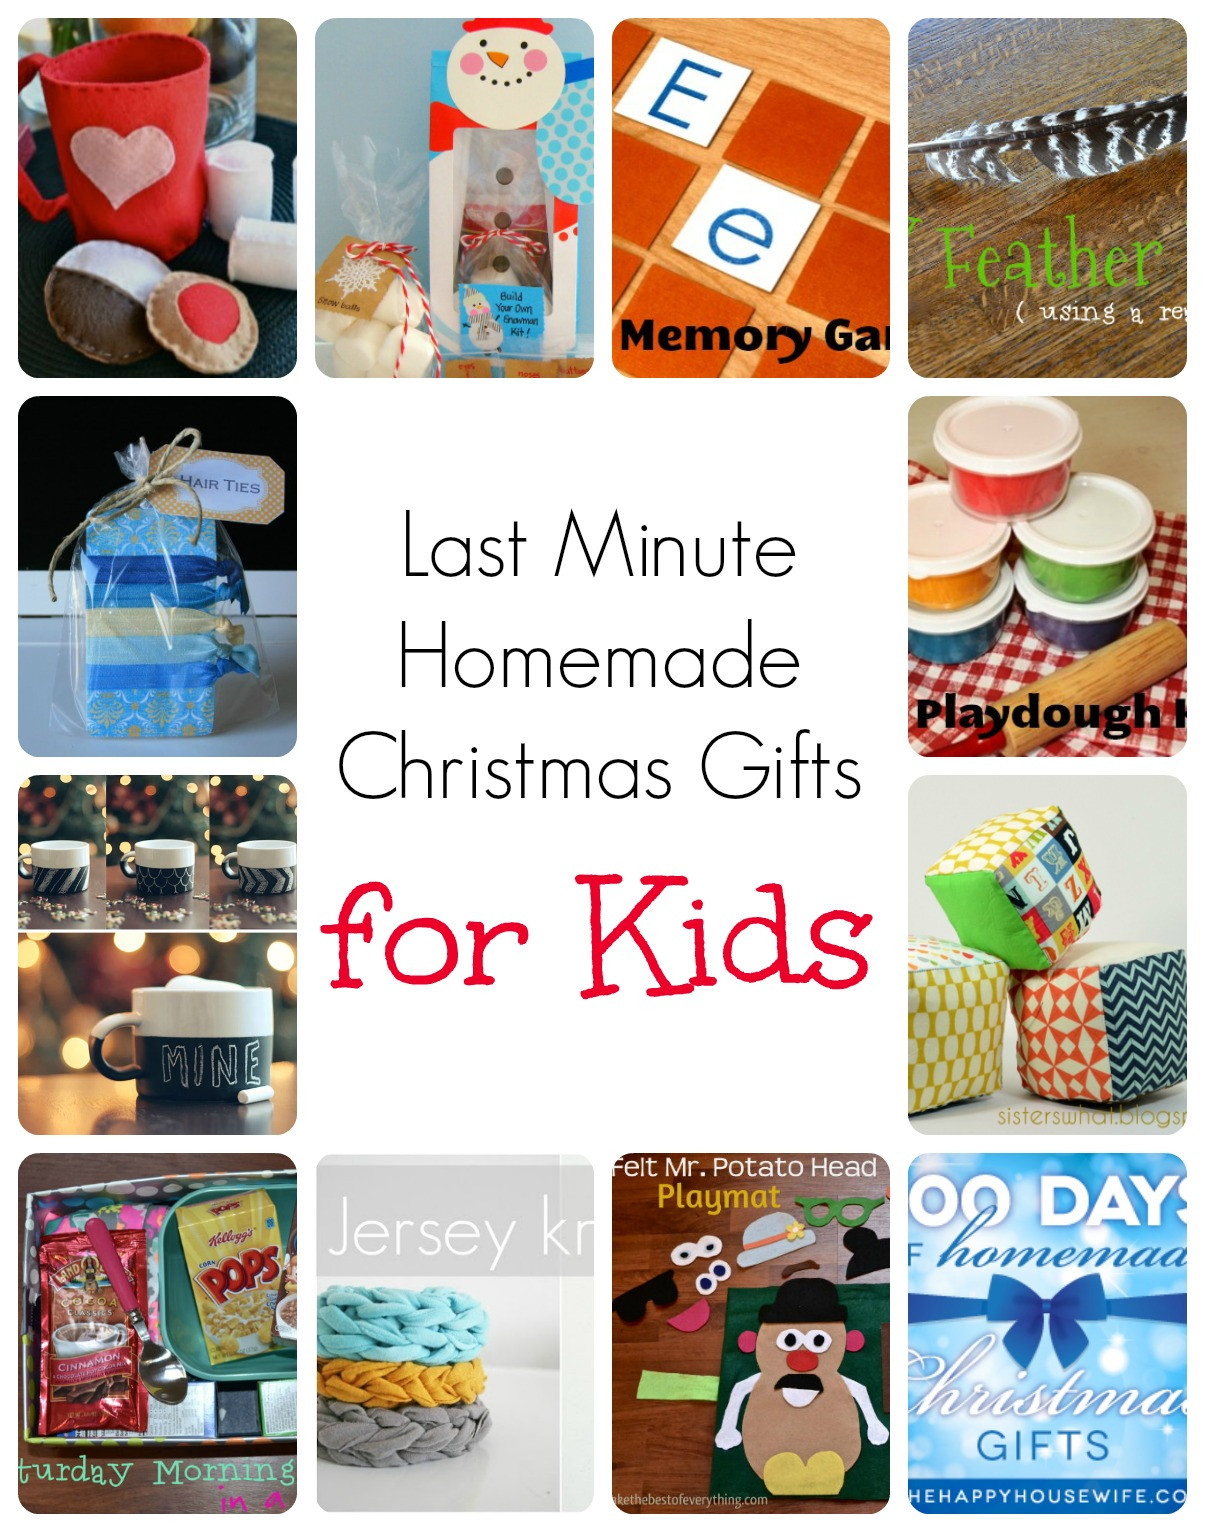 Handmade Christmas Gifts For Kids
 Last Minute Homemade Christmas Gifts for Kids The Happy